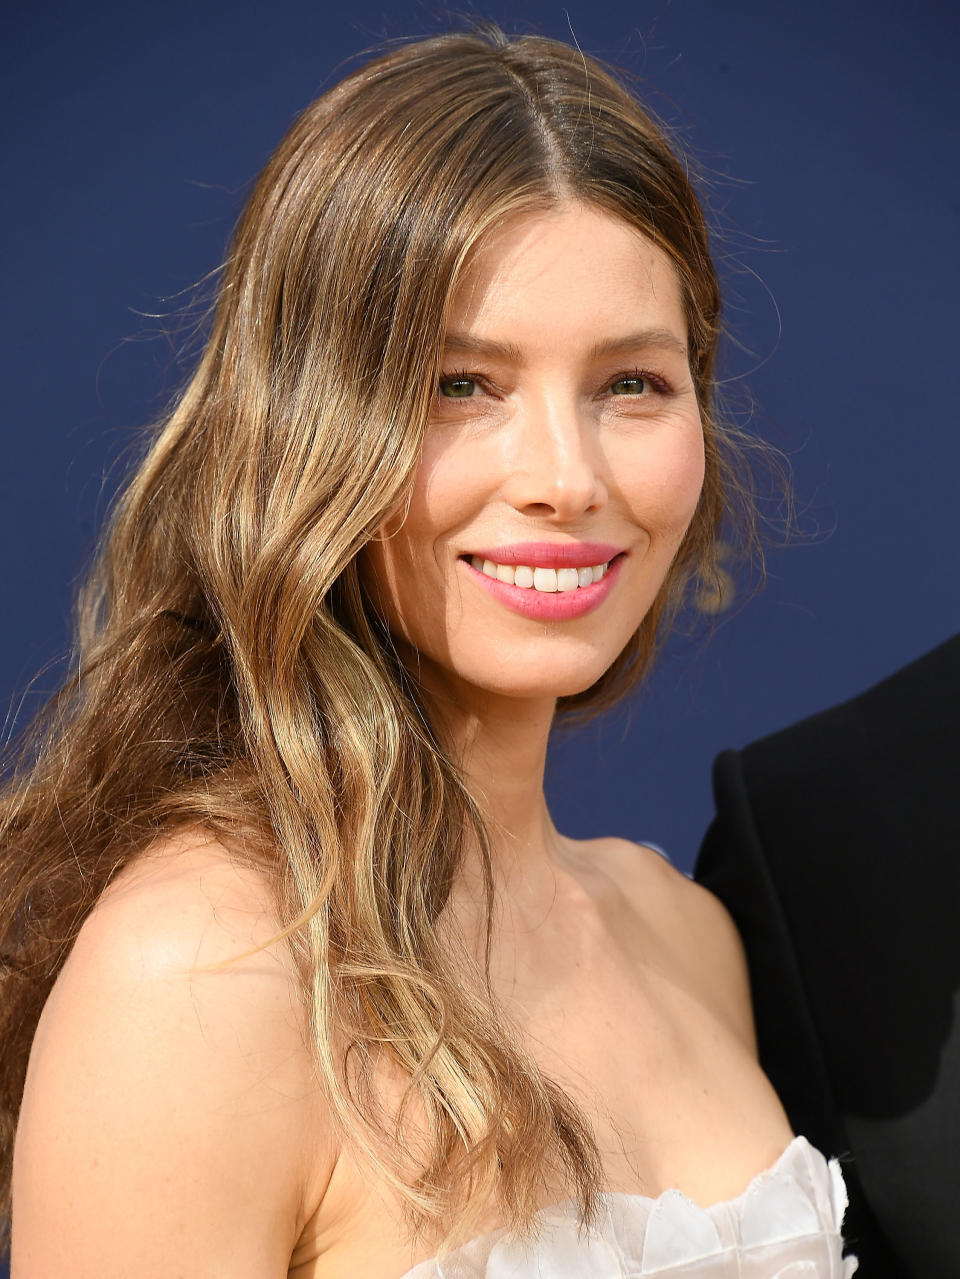 Photos of Jessica Biel posing with California lawmakers have people calling the star an "anti-vaxxer." 